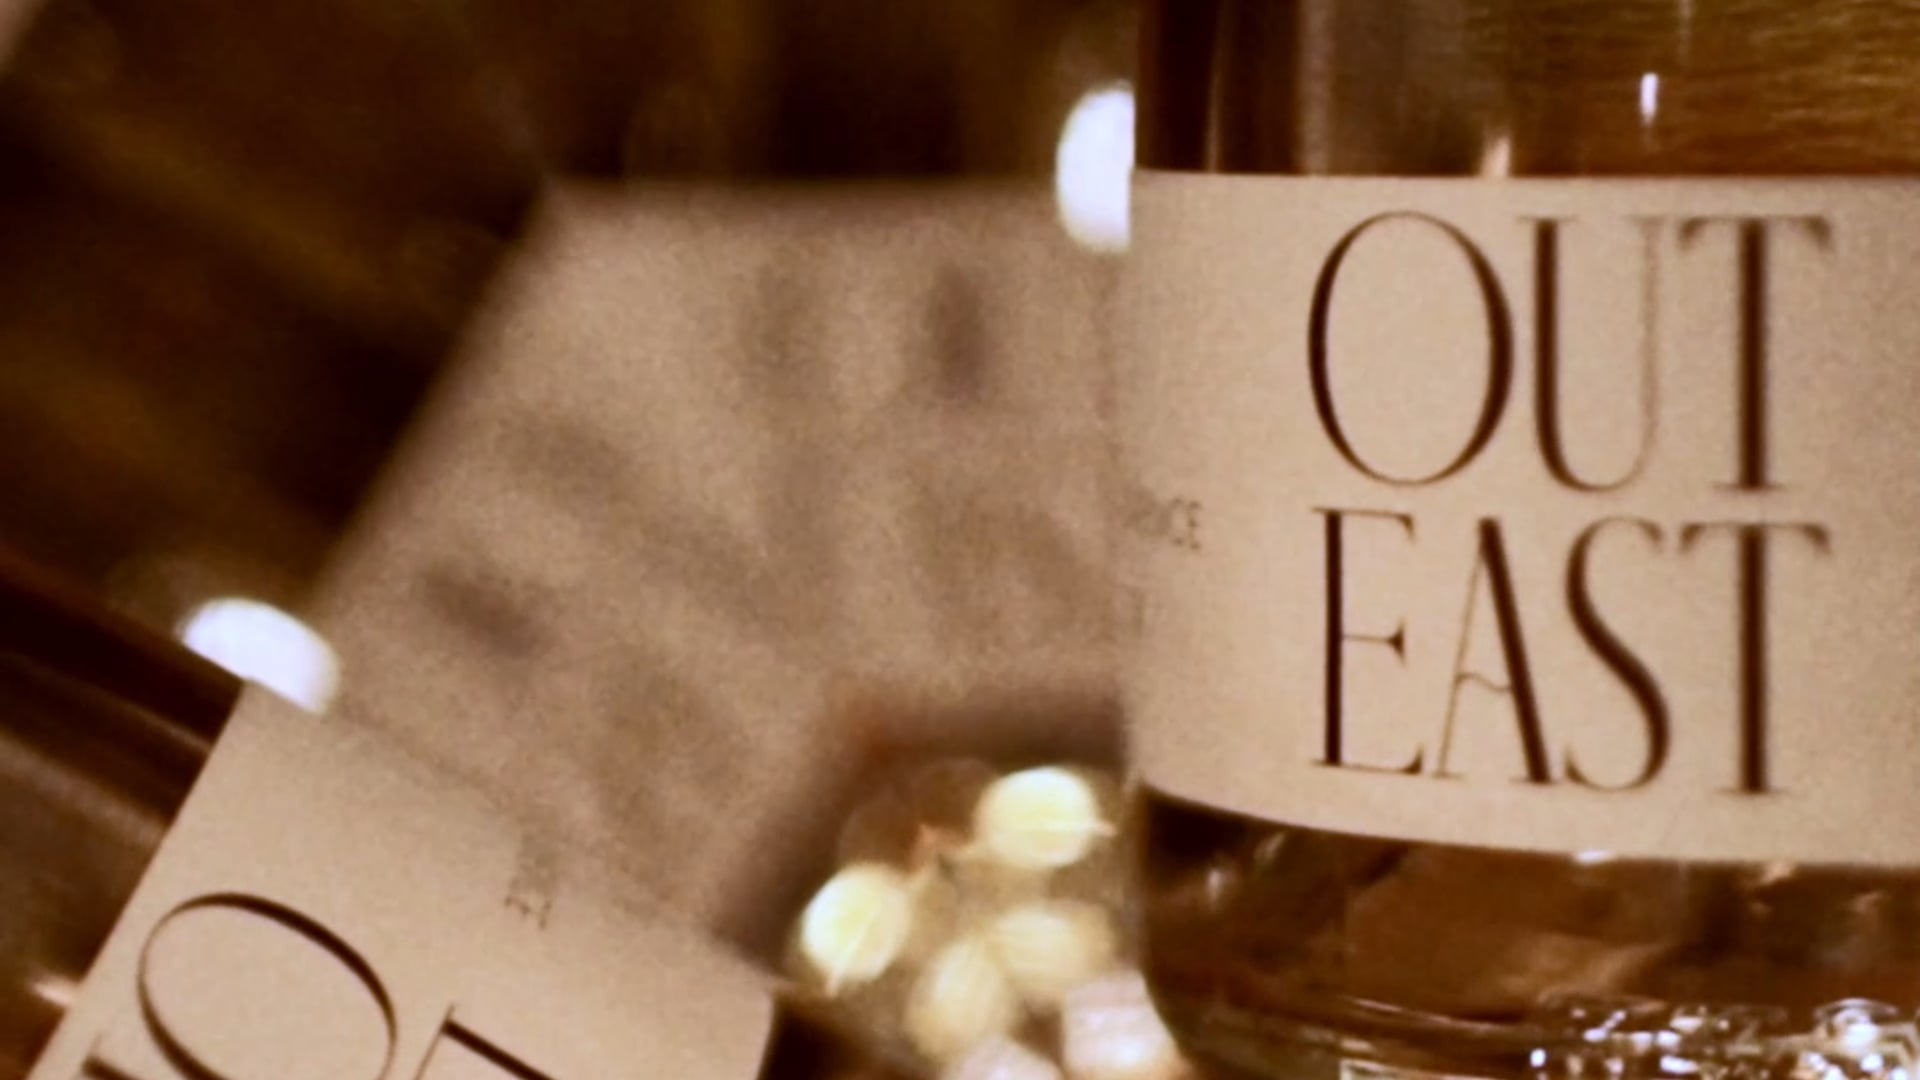 OUT EAST wine company / for Stories Instagram / Musin Productions